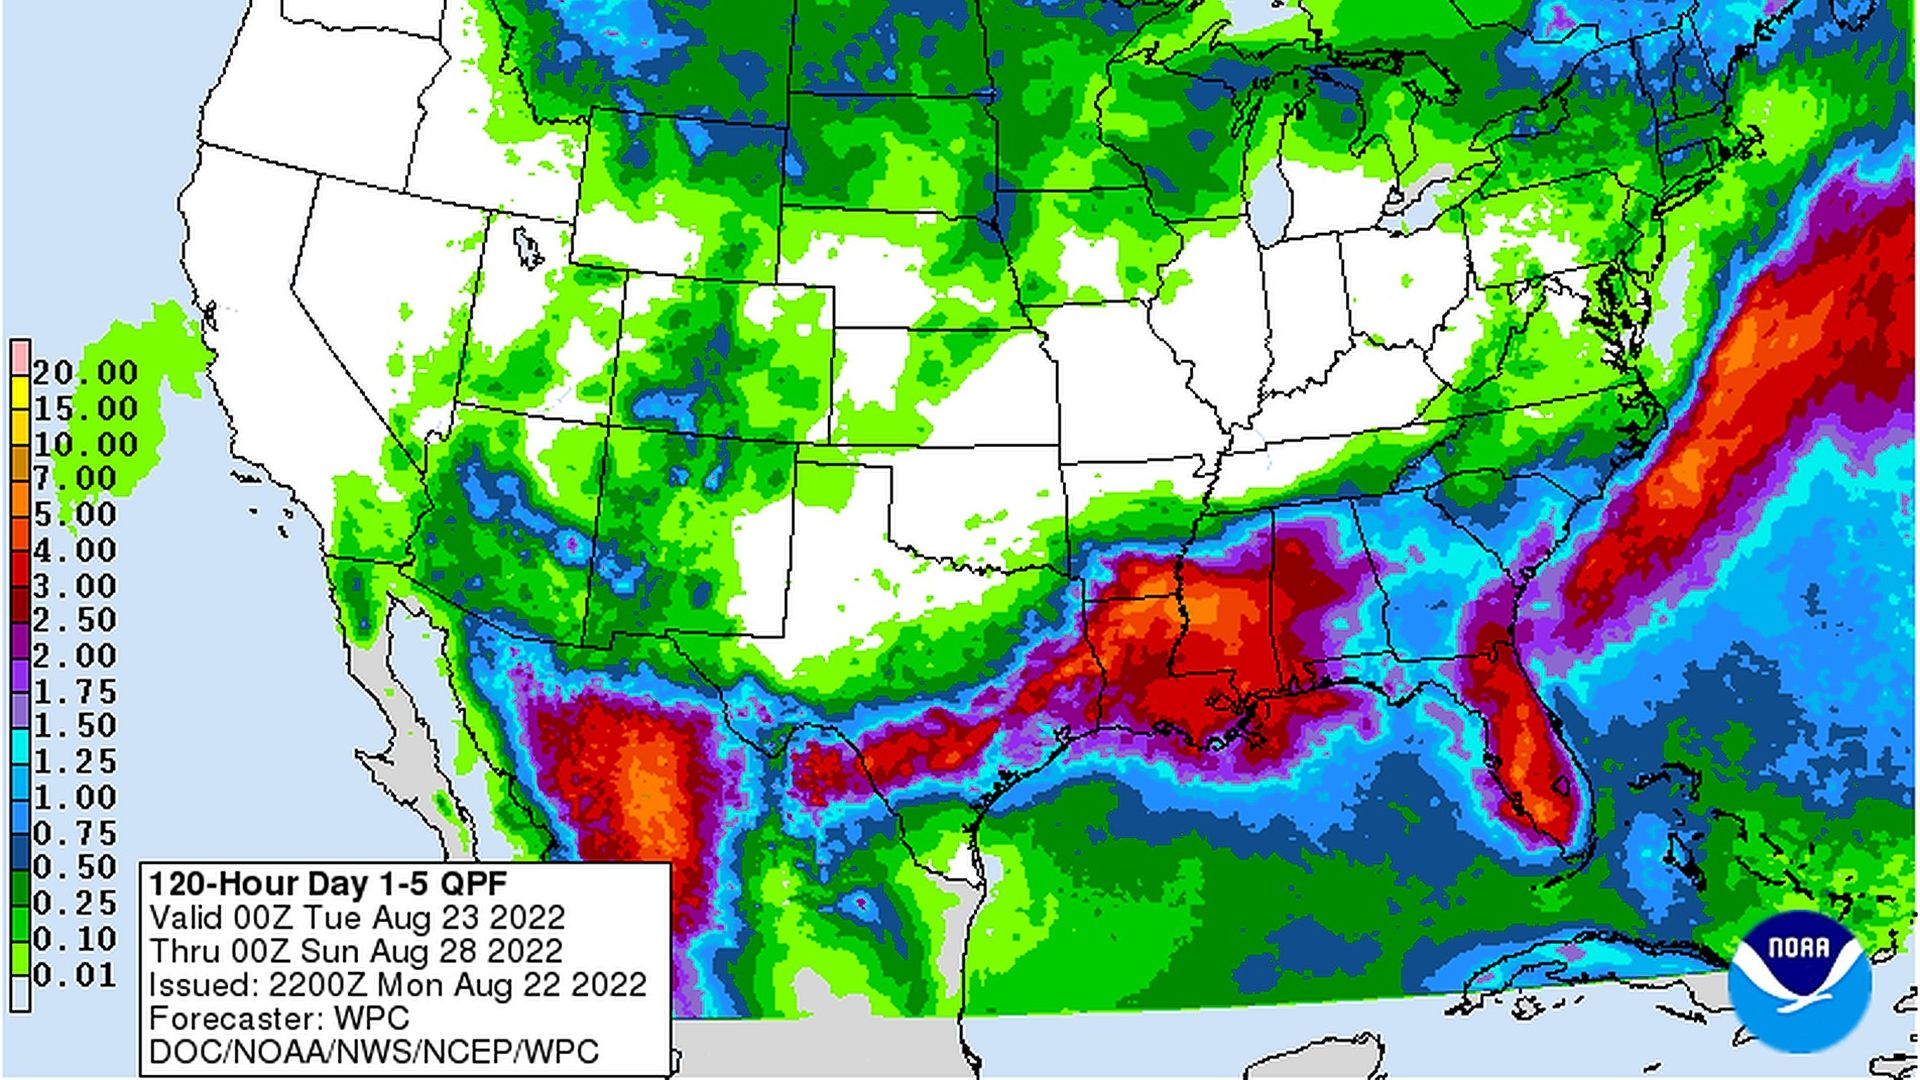 A map showing the forecast heavy rainfall for this week across the U.S. and the Southwest in particular.